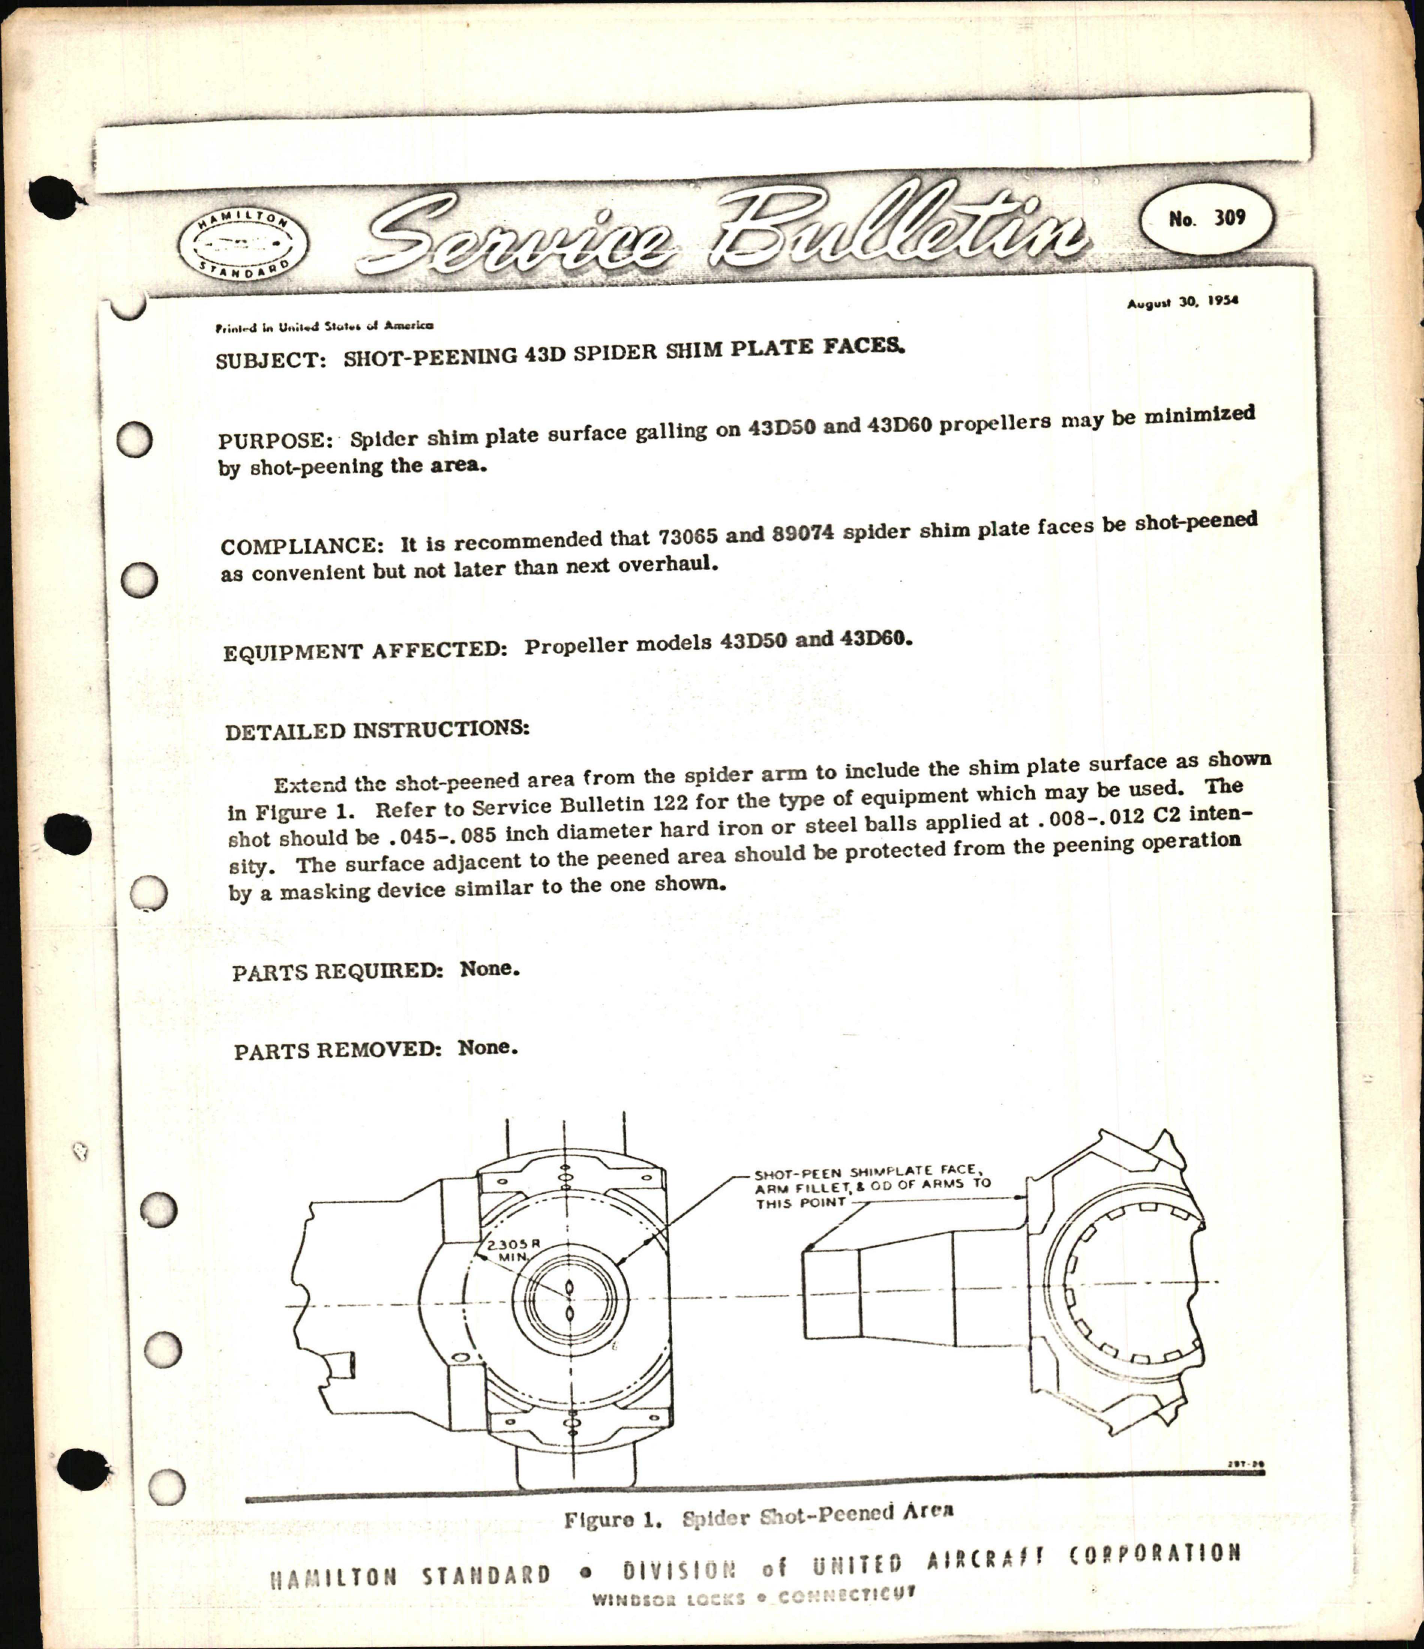 Sample page 1 from AirCorps Library document: Shot-Peening 43D Spider Shim Plate Faces